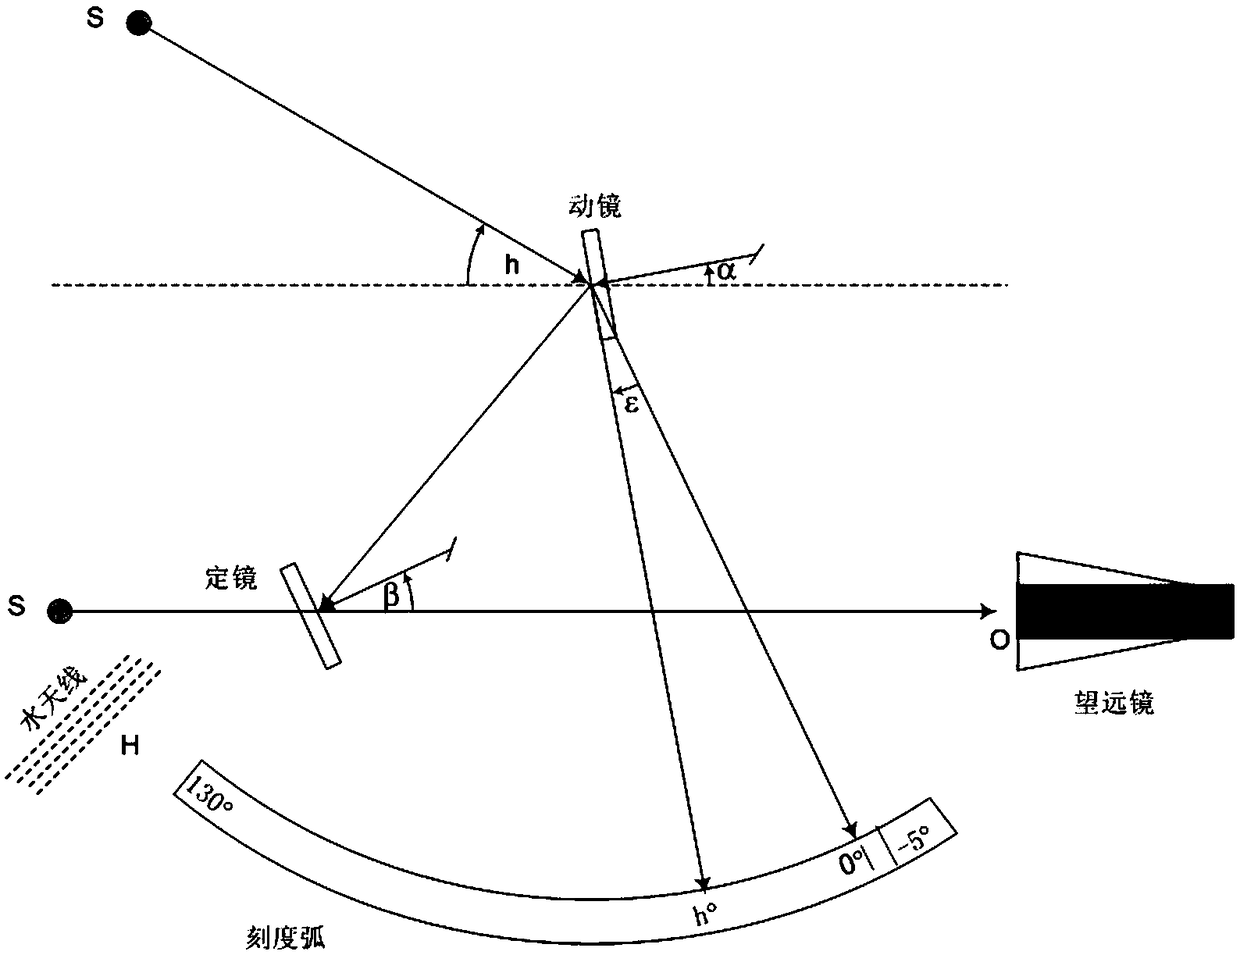 A self-reference sextant